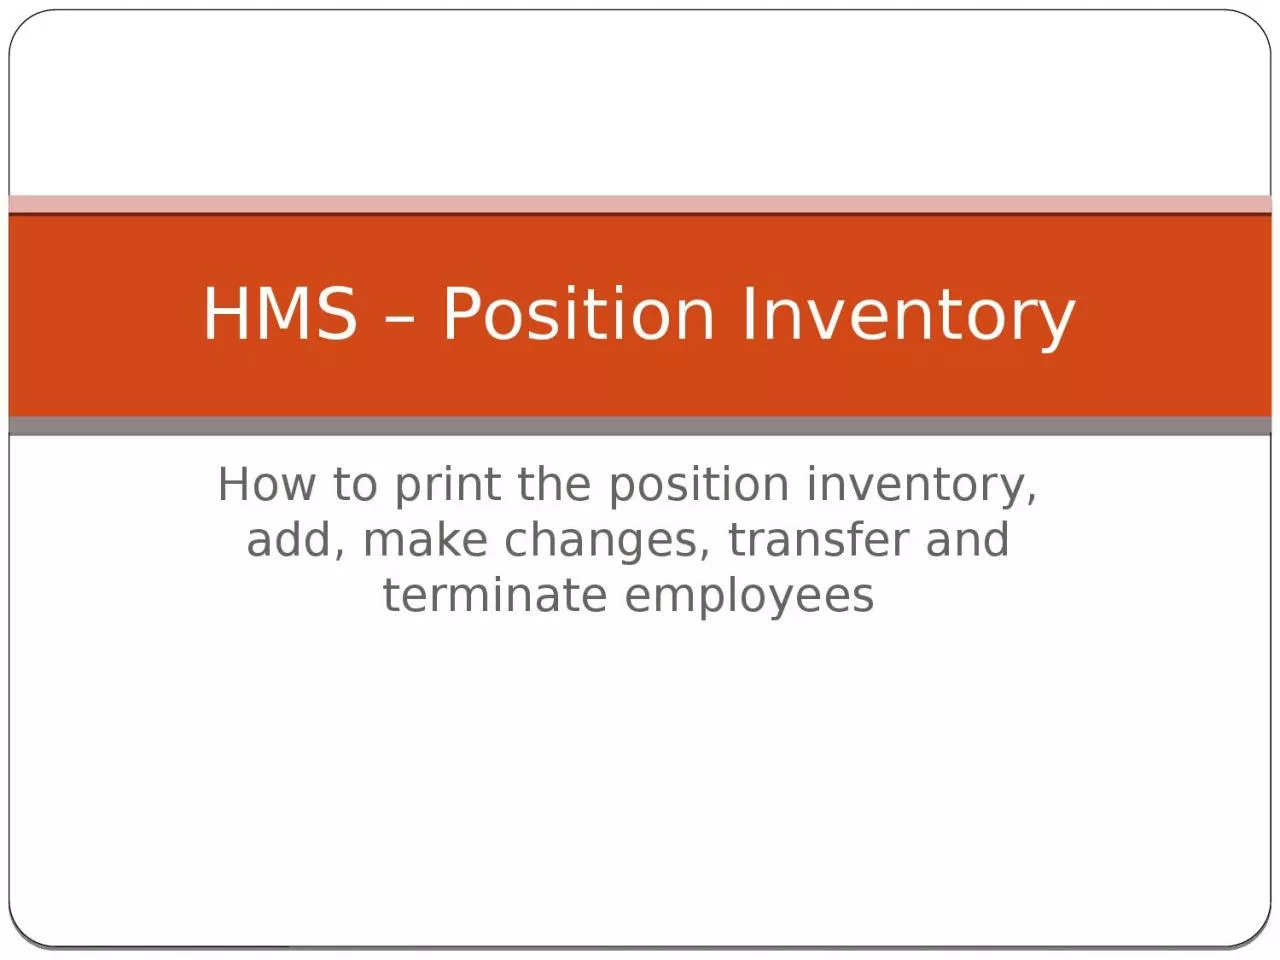 How to  print the position inventory, add, make changes, transfer and terminate employees